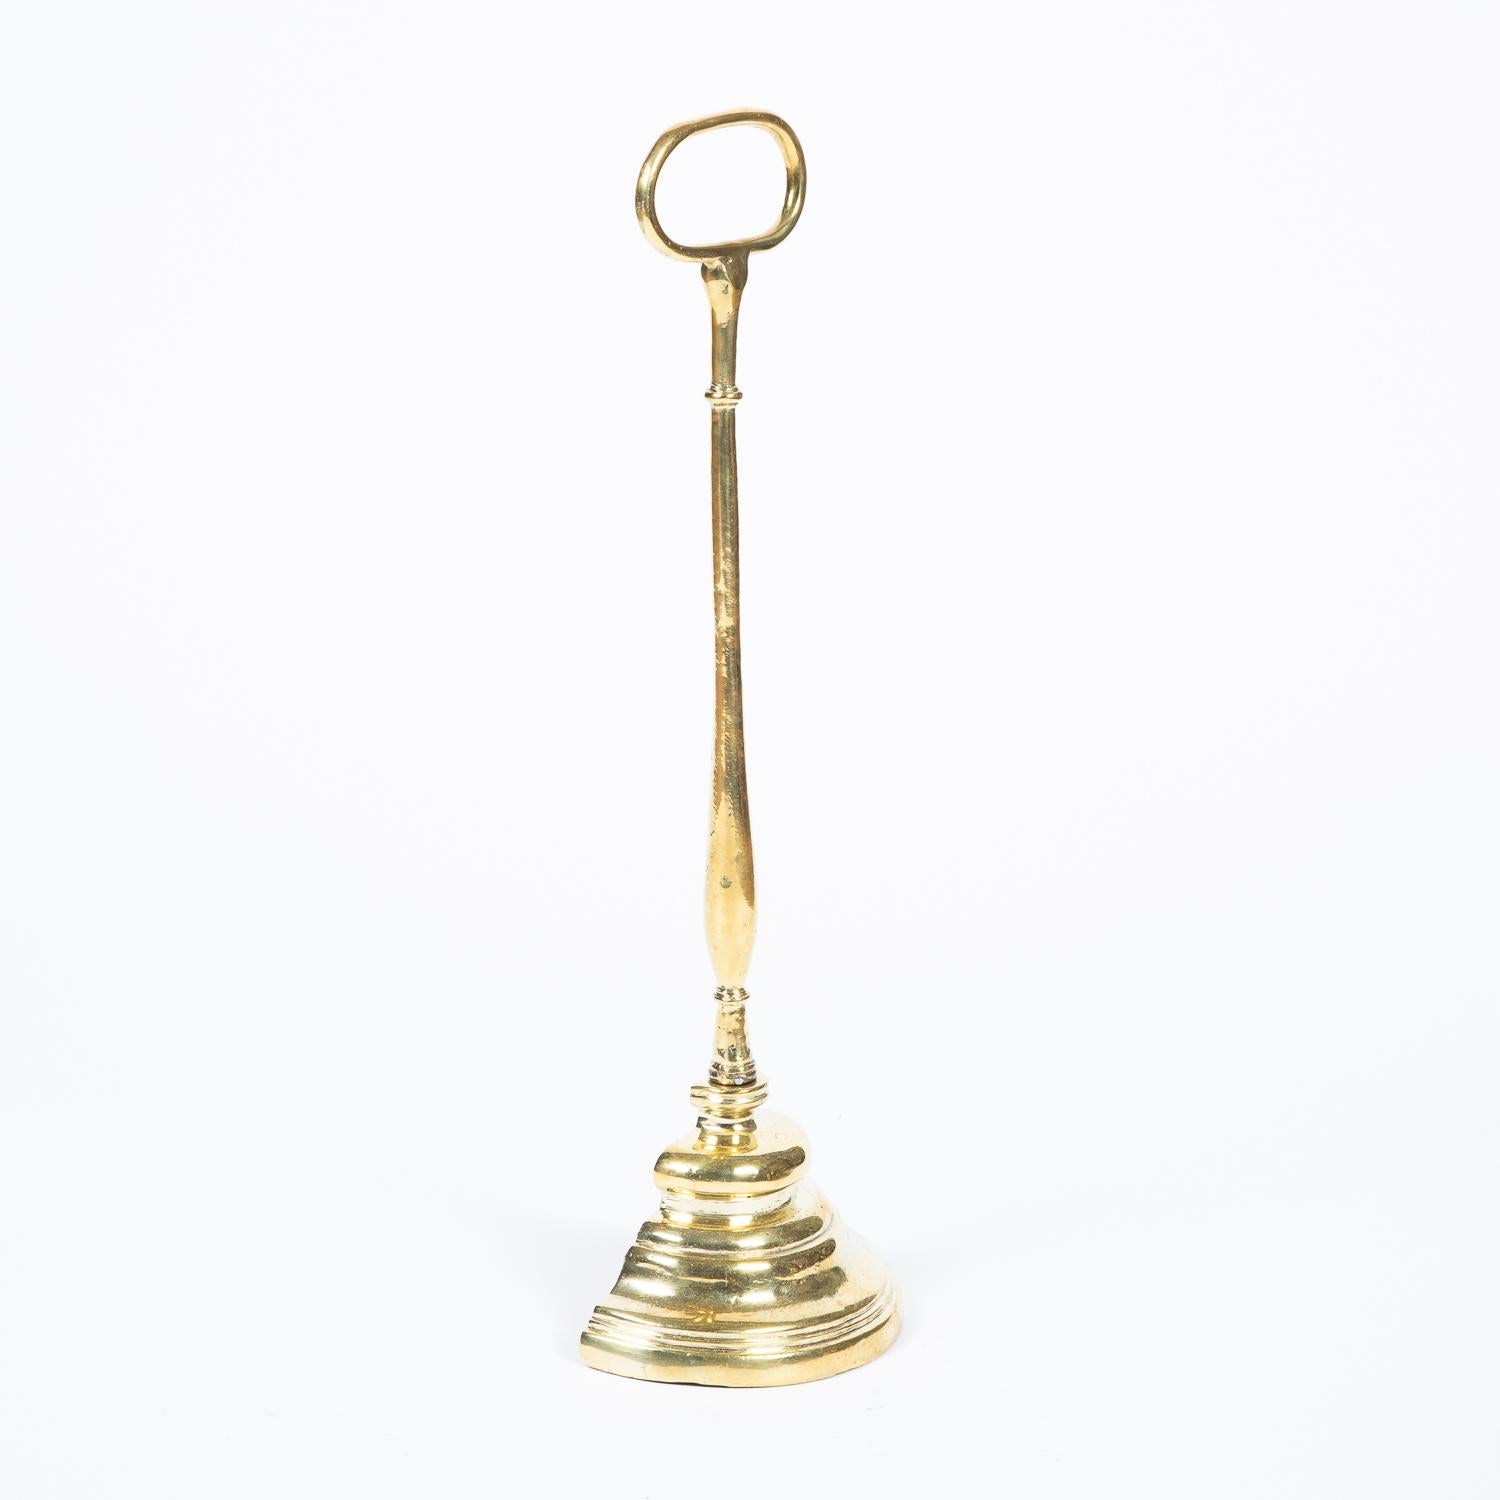 A brass door porter or door stop, with loop handle and stepped weighted base.